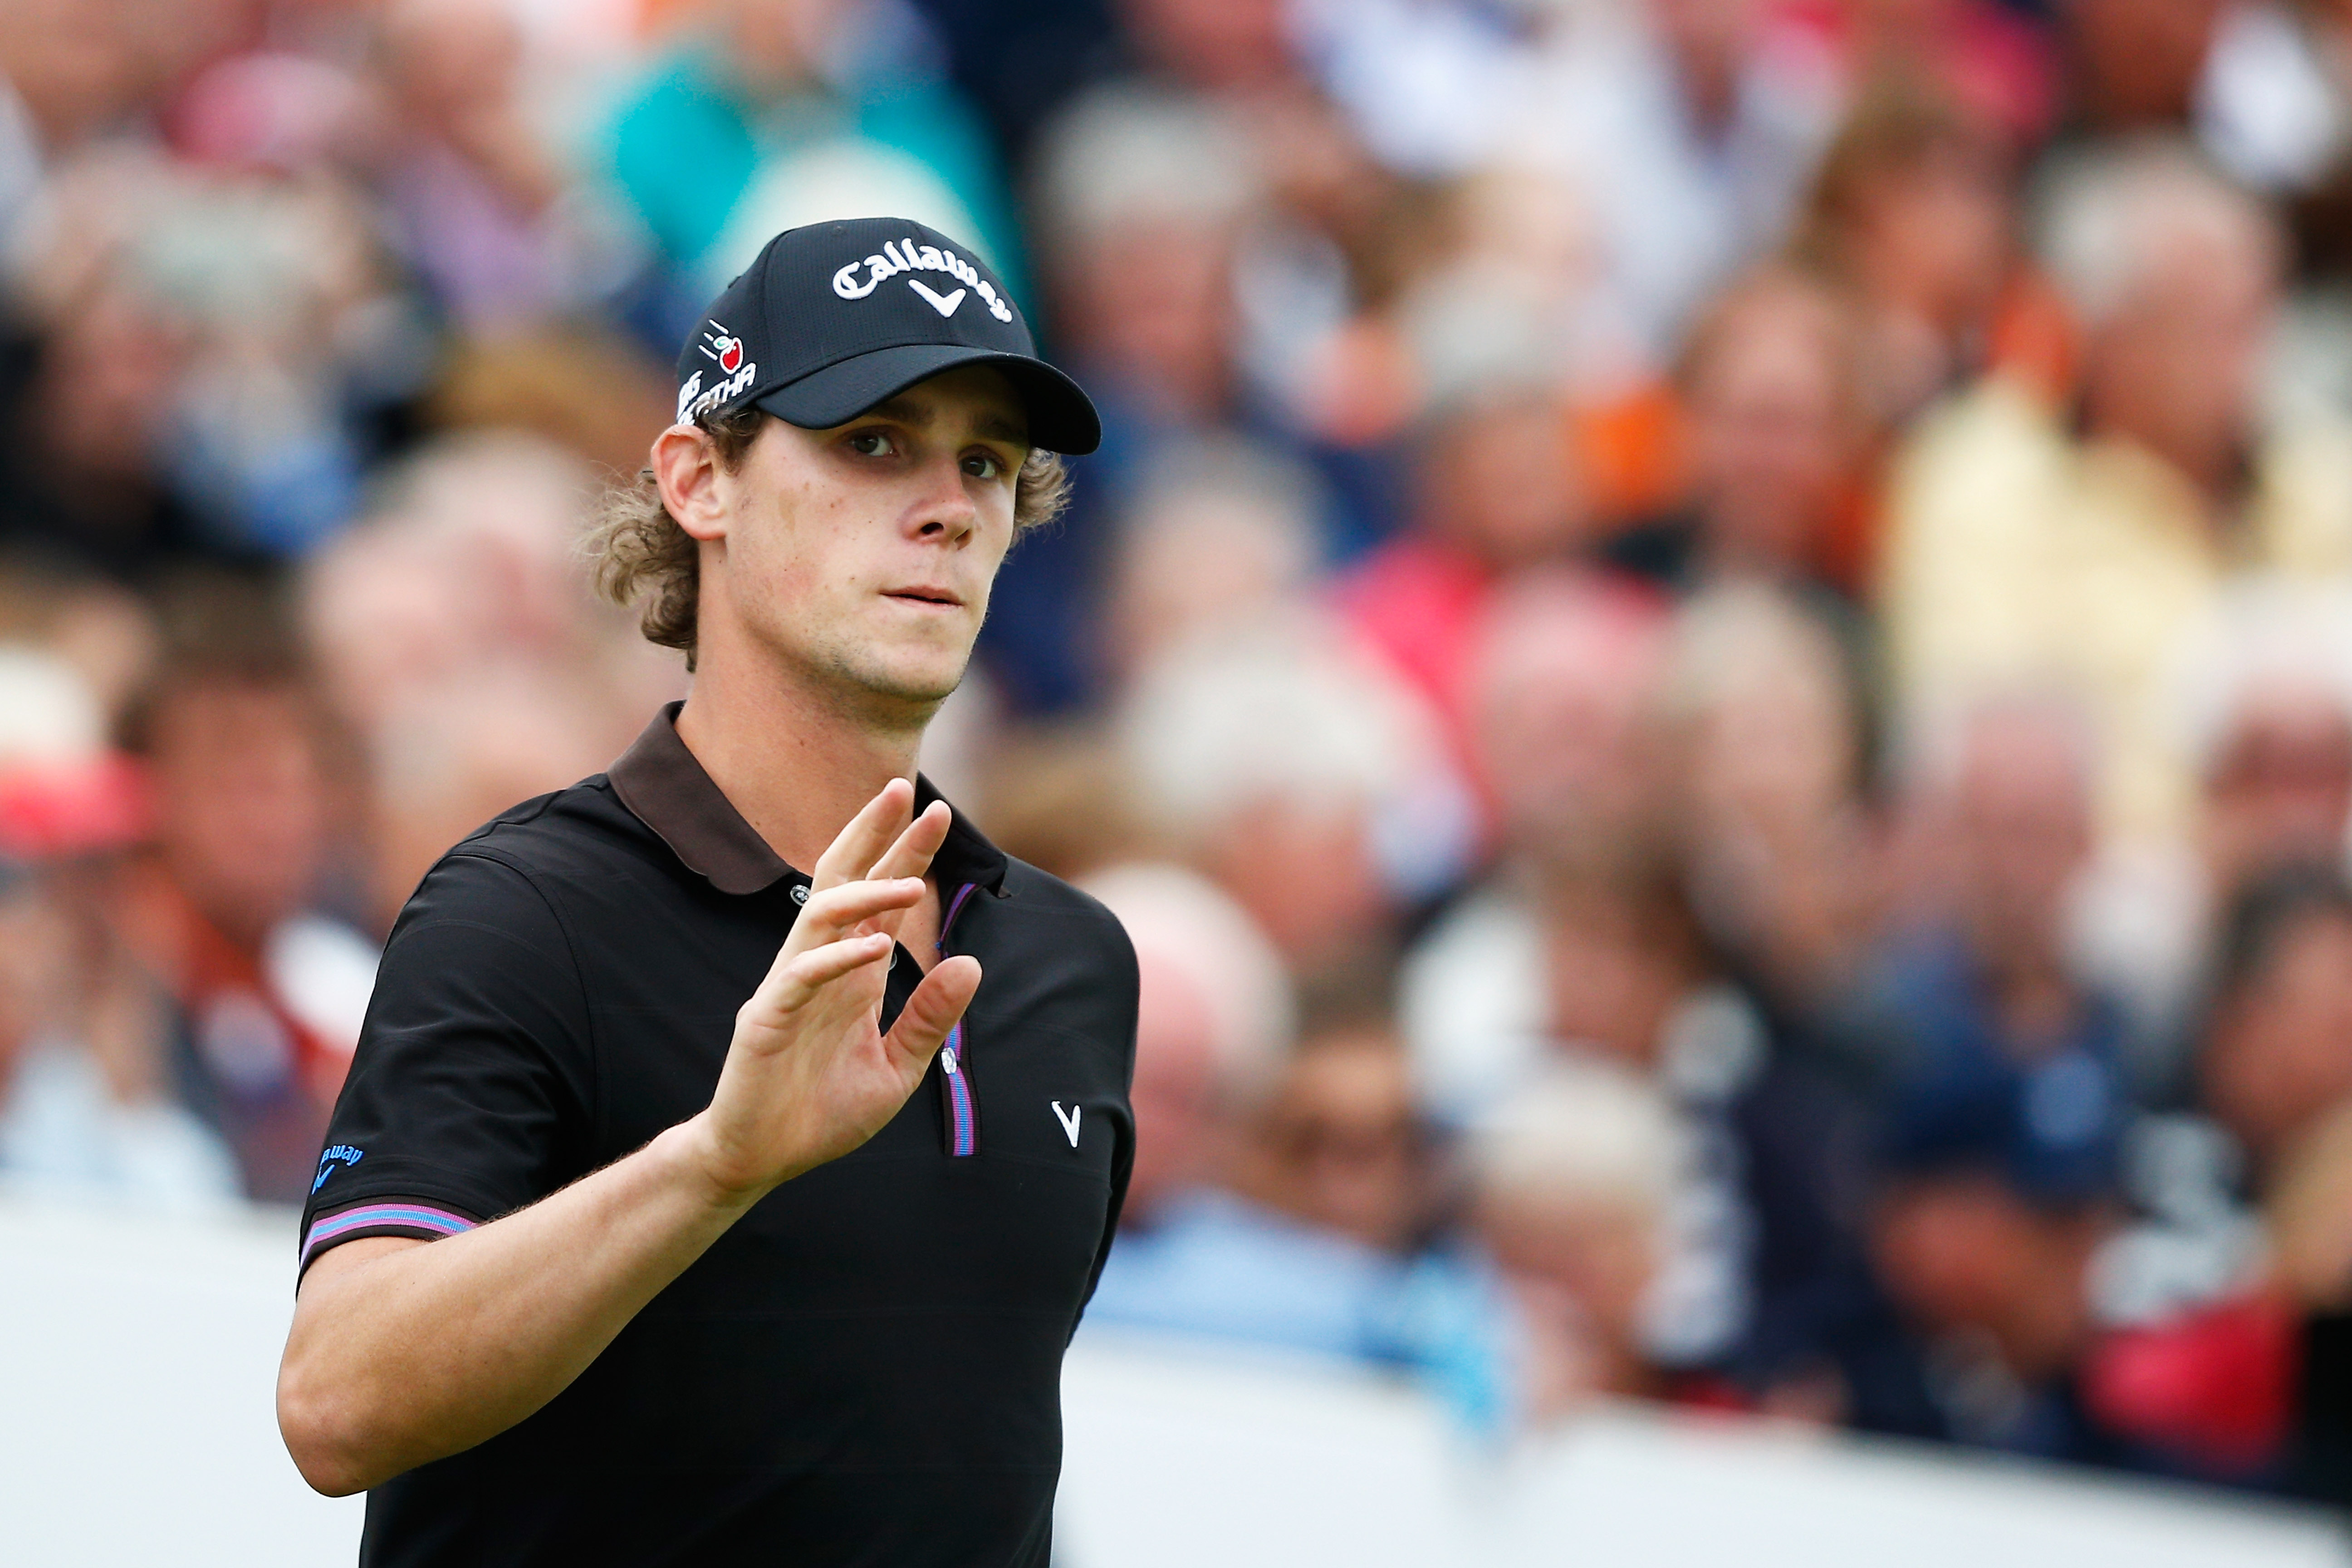 Pieters won his maiden European Tour title at the Czech Masters this month (Photo: Getty Images)